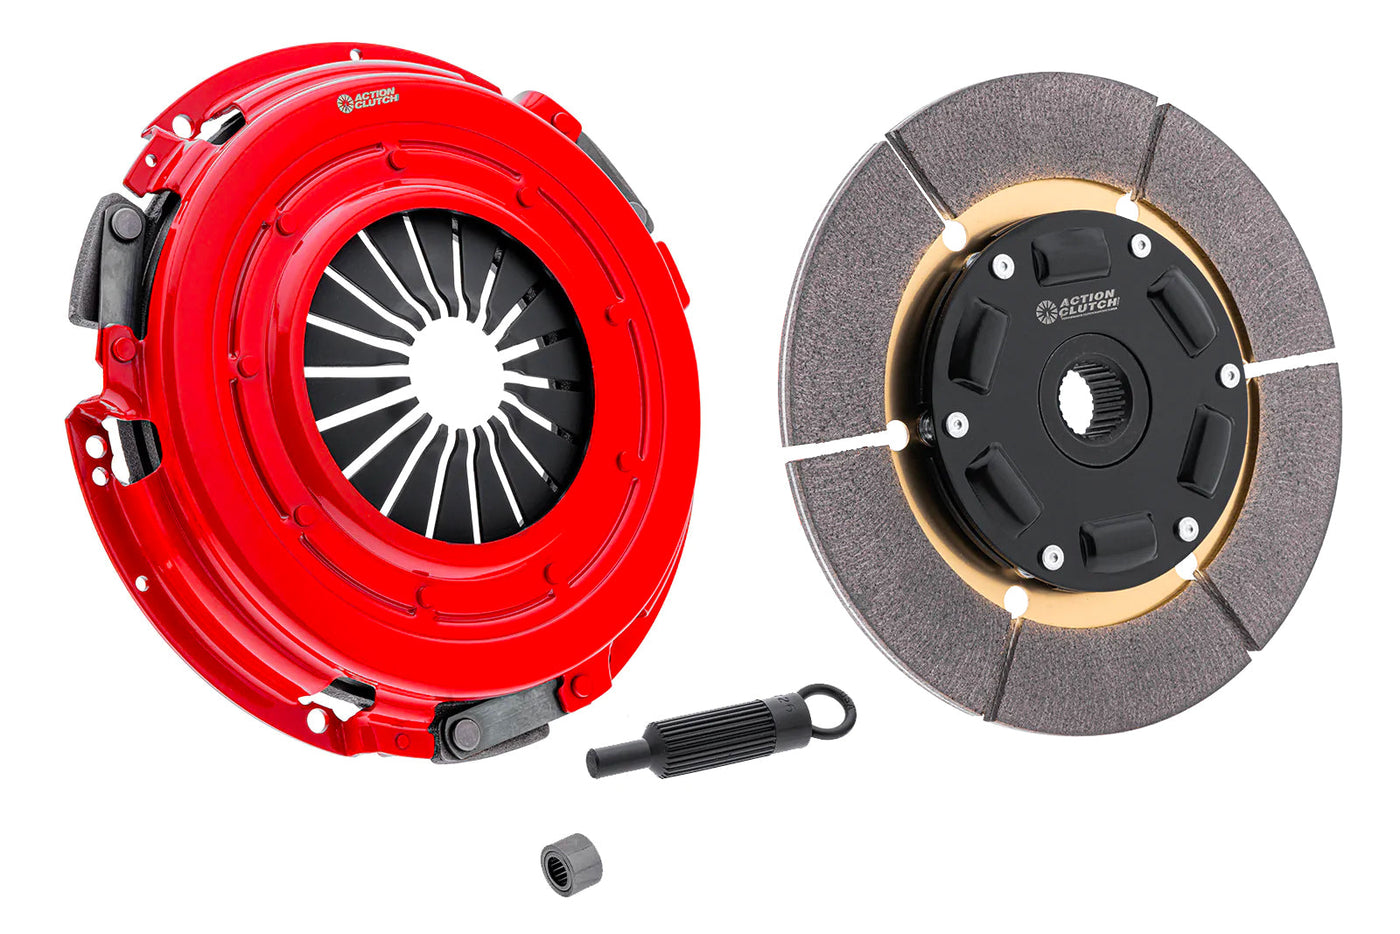 Ironman Sprung (Street) Clutch Kit for Chevrolet Corvette 1997-2004 5.7L (LS1) Without Slave and Release Bearing